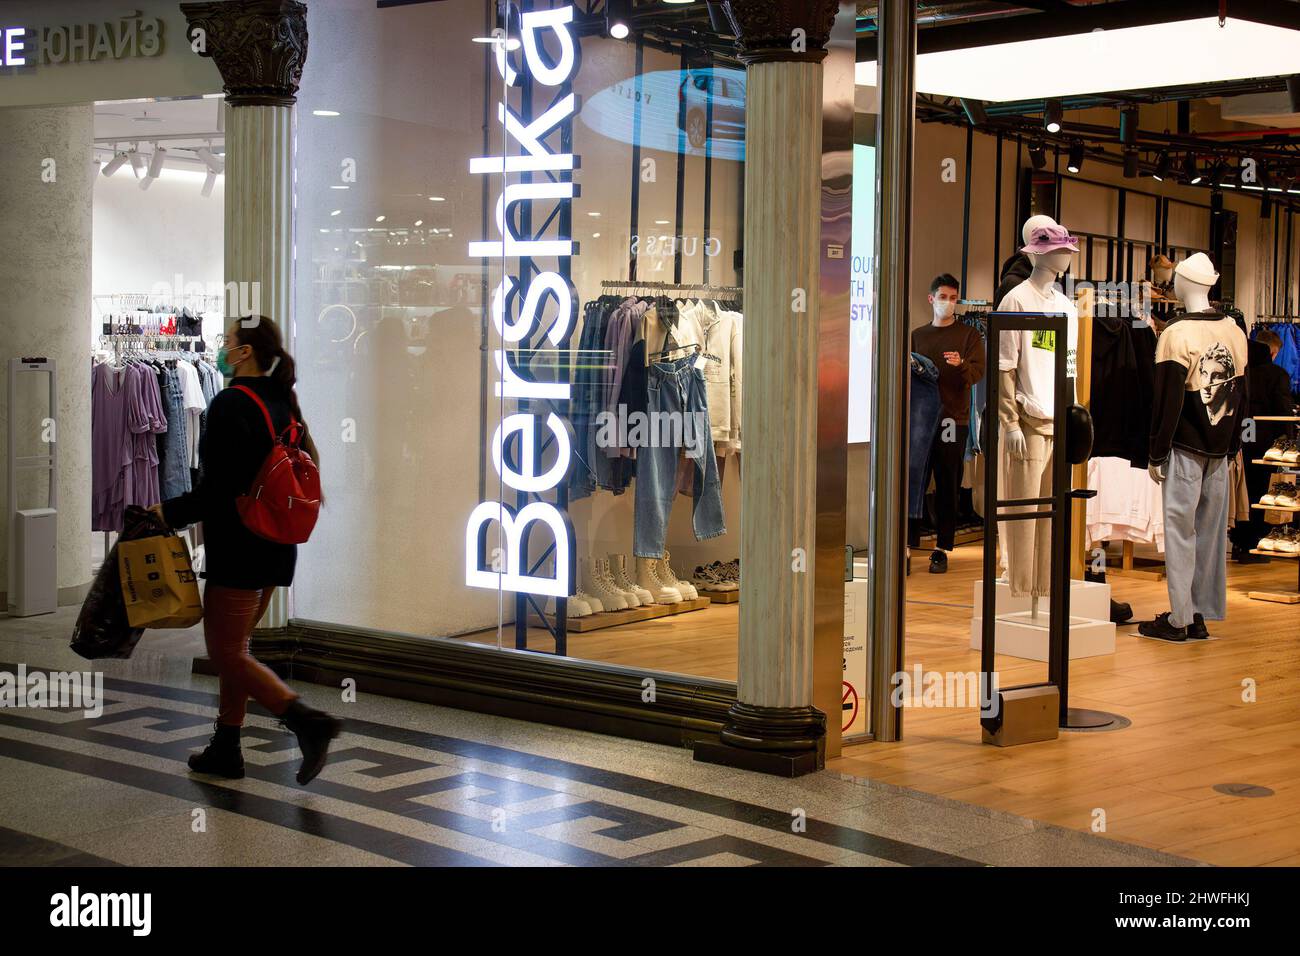 Moscow, Russia. 05th Mar, 2022. A woman passes by Bershka boutique in  Moscow. The Spanish fashion retailer Inditex, which owns such brands as  Zara, Bershka, Pull&Bear, Massimo Dutti, Stradivarius, and others, announced